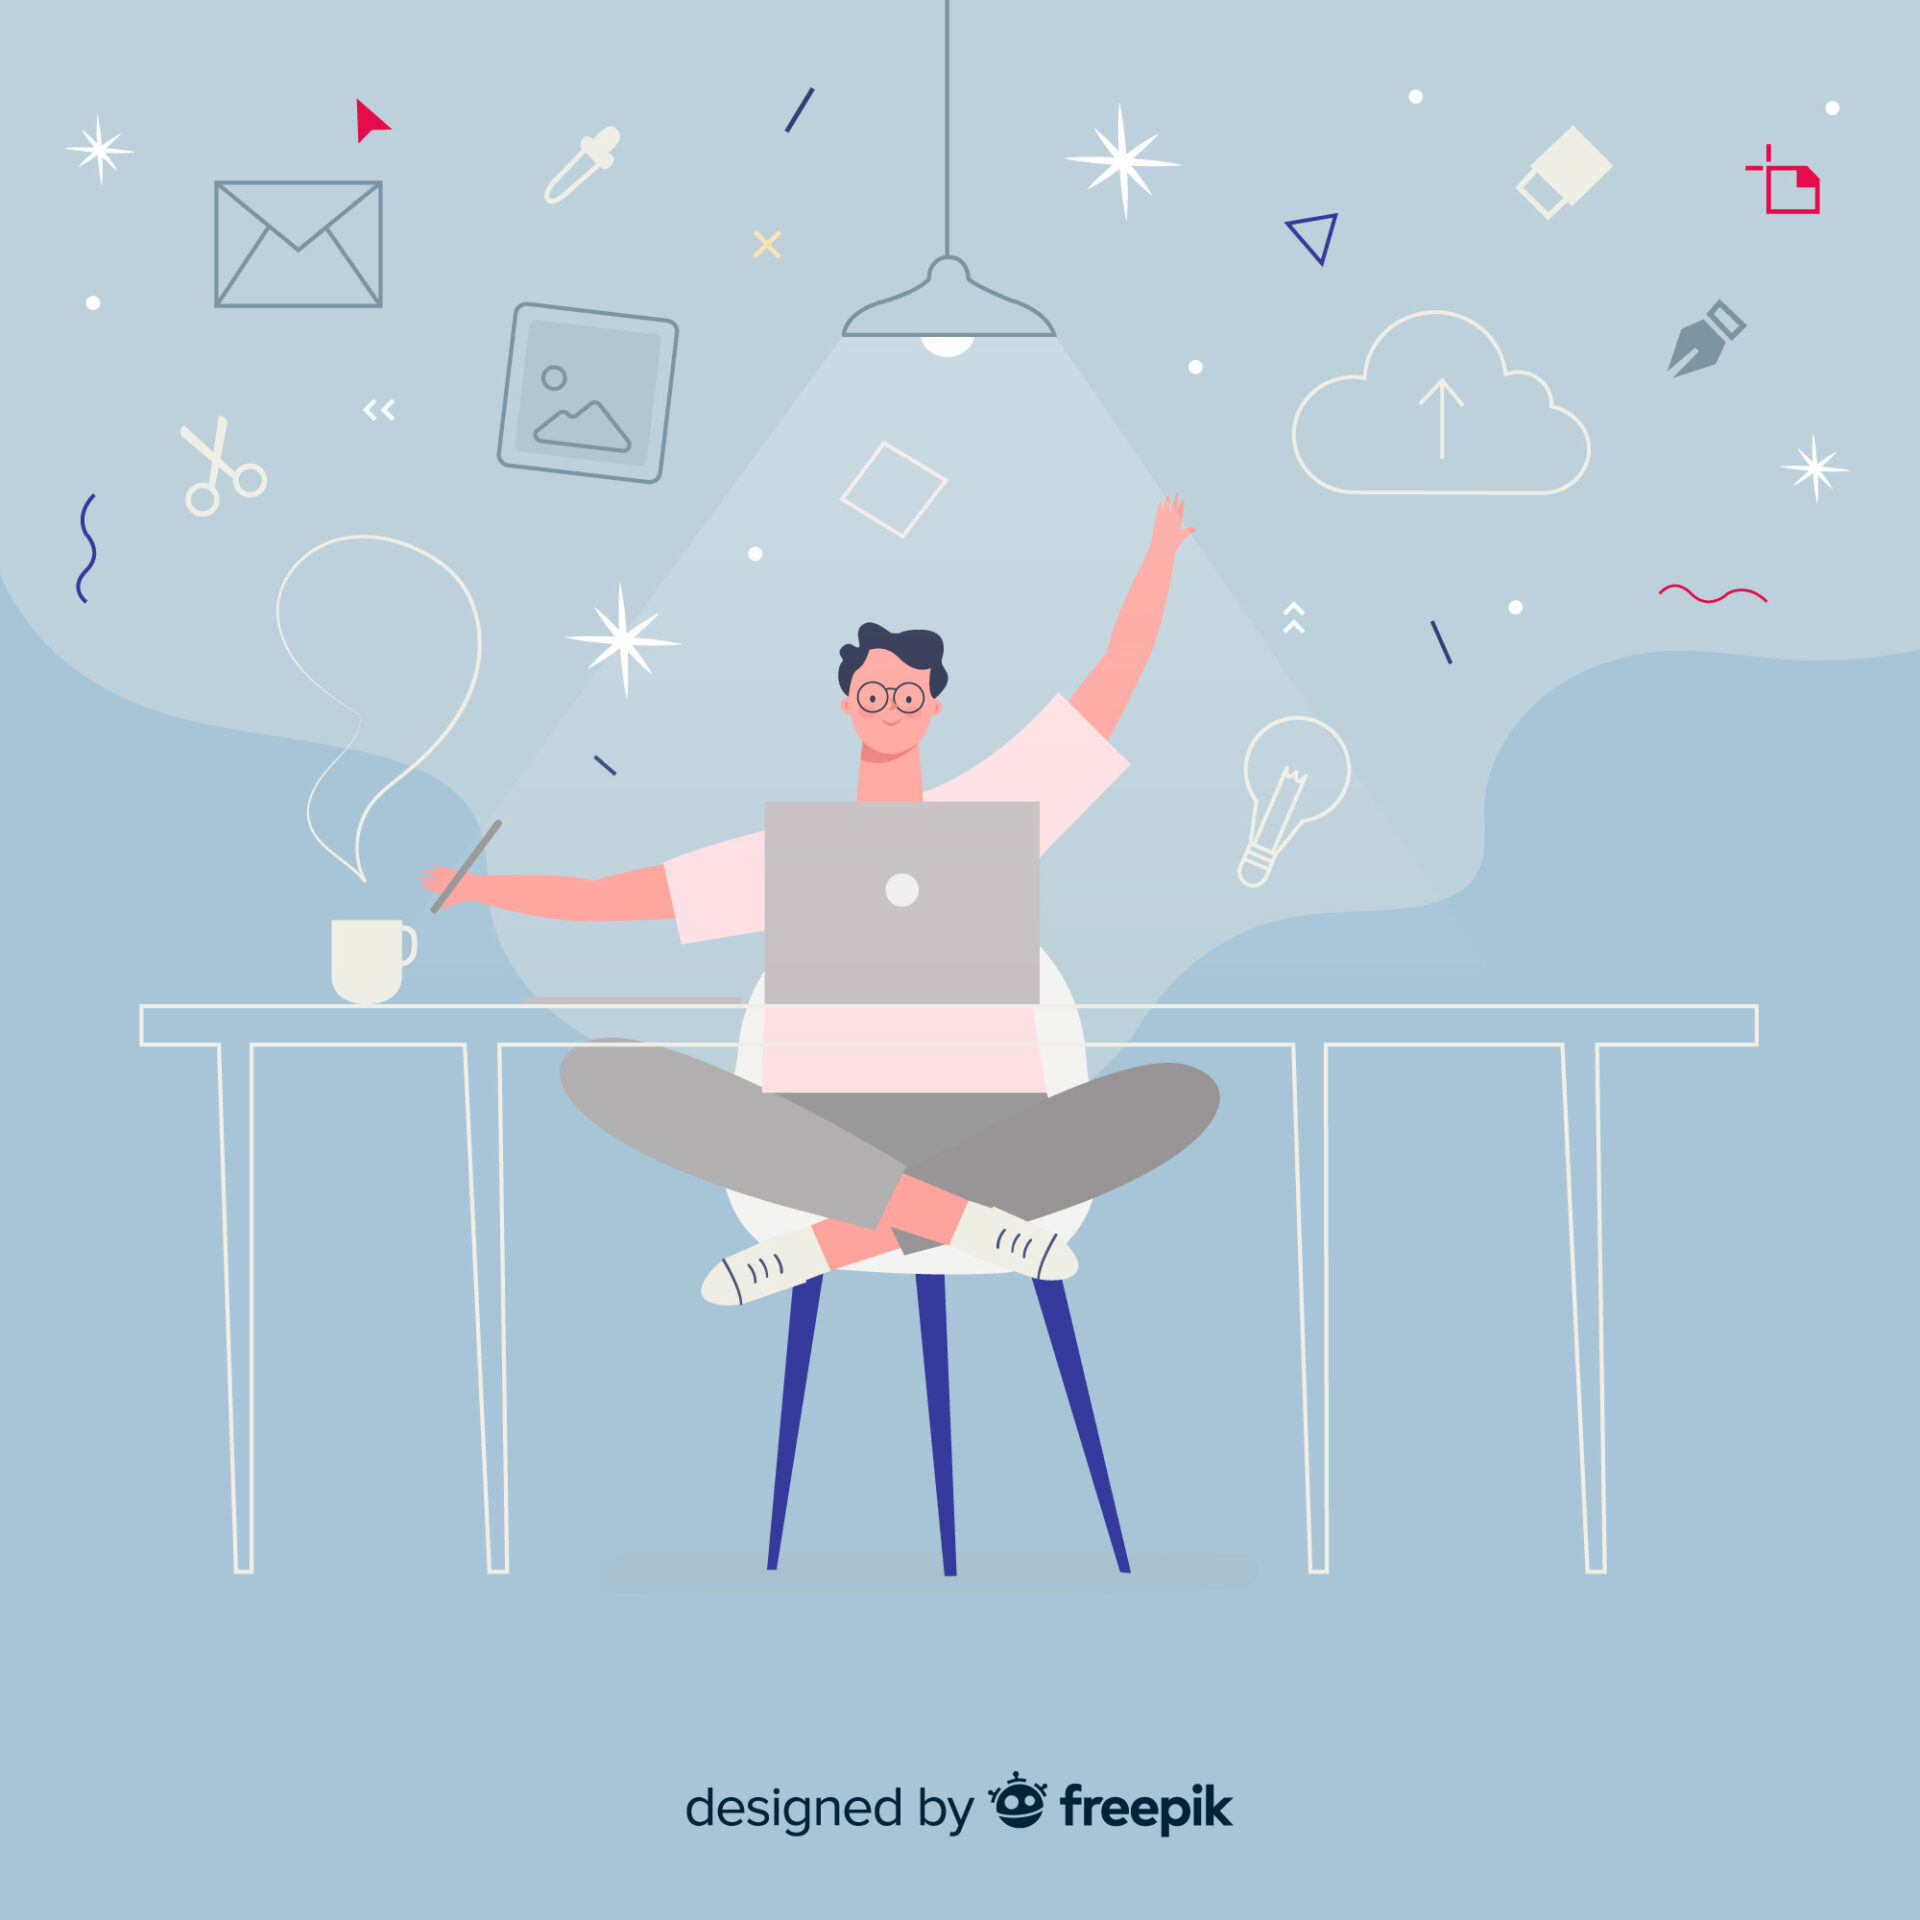 A playful illustration of a person sitting cross-legged on a chair in front of a desk, working on a laptop. The person is smiling and raising one arm in a celebratory gesture. Around them are various icons representing creativity and productivity